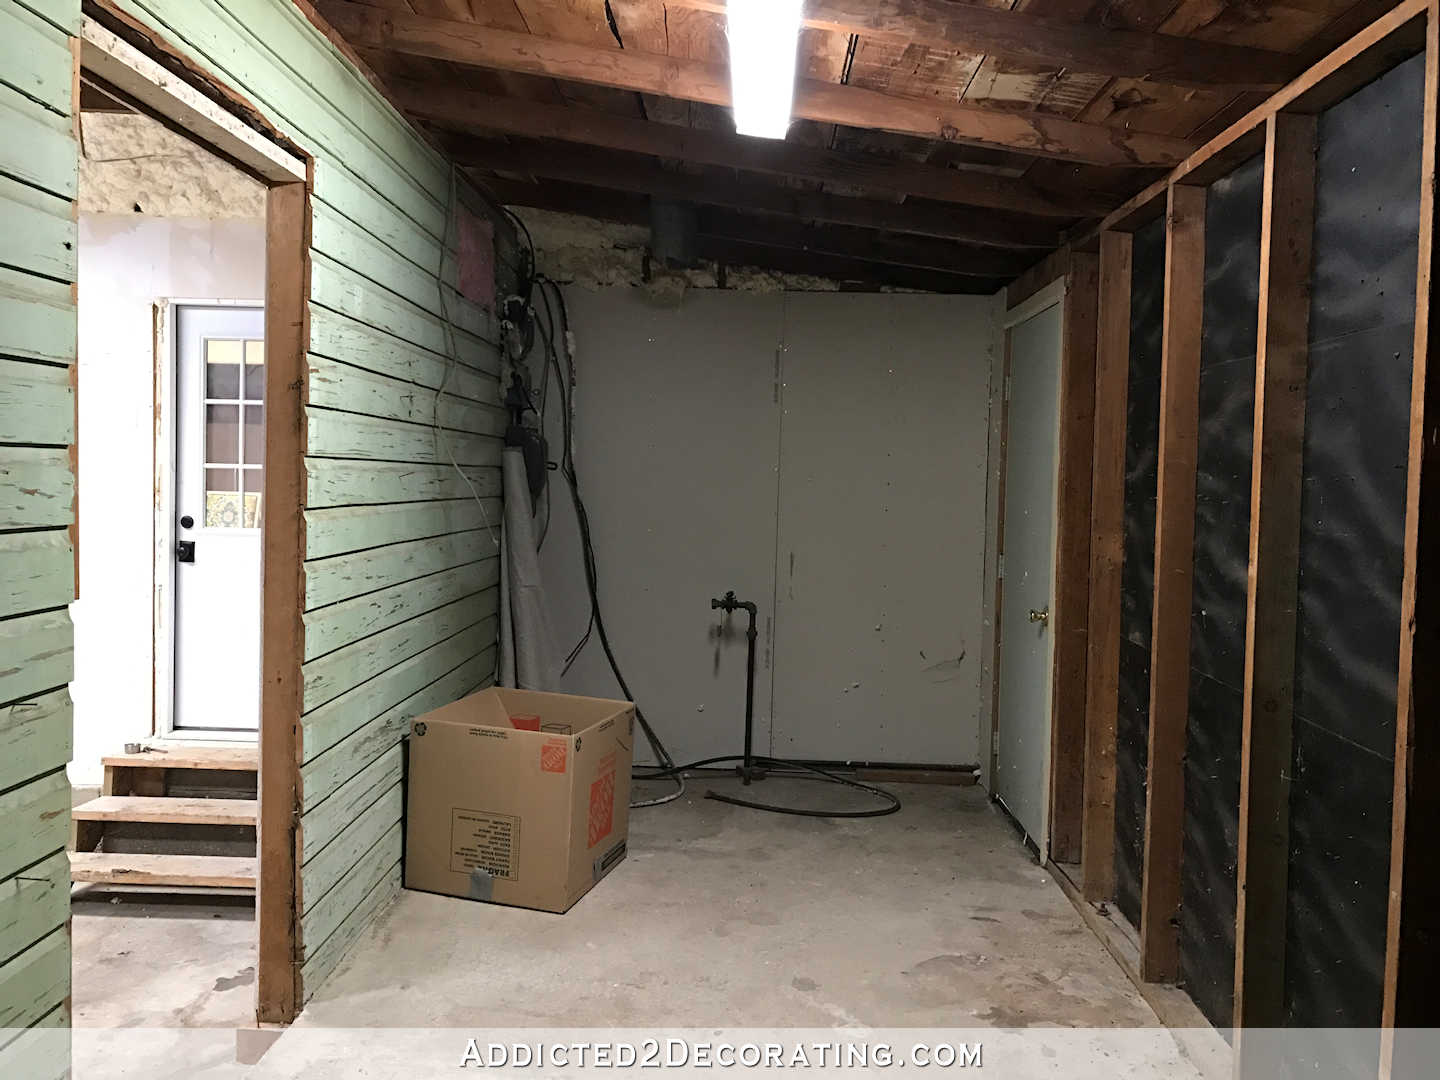 7-1-17 - garage and storage room cleared out - 7